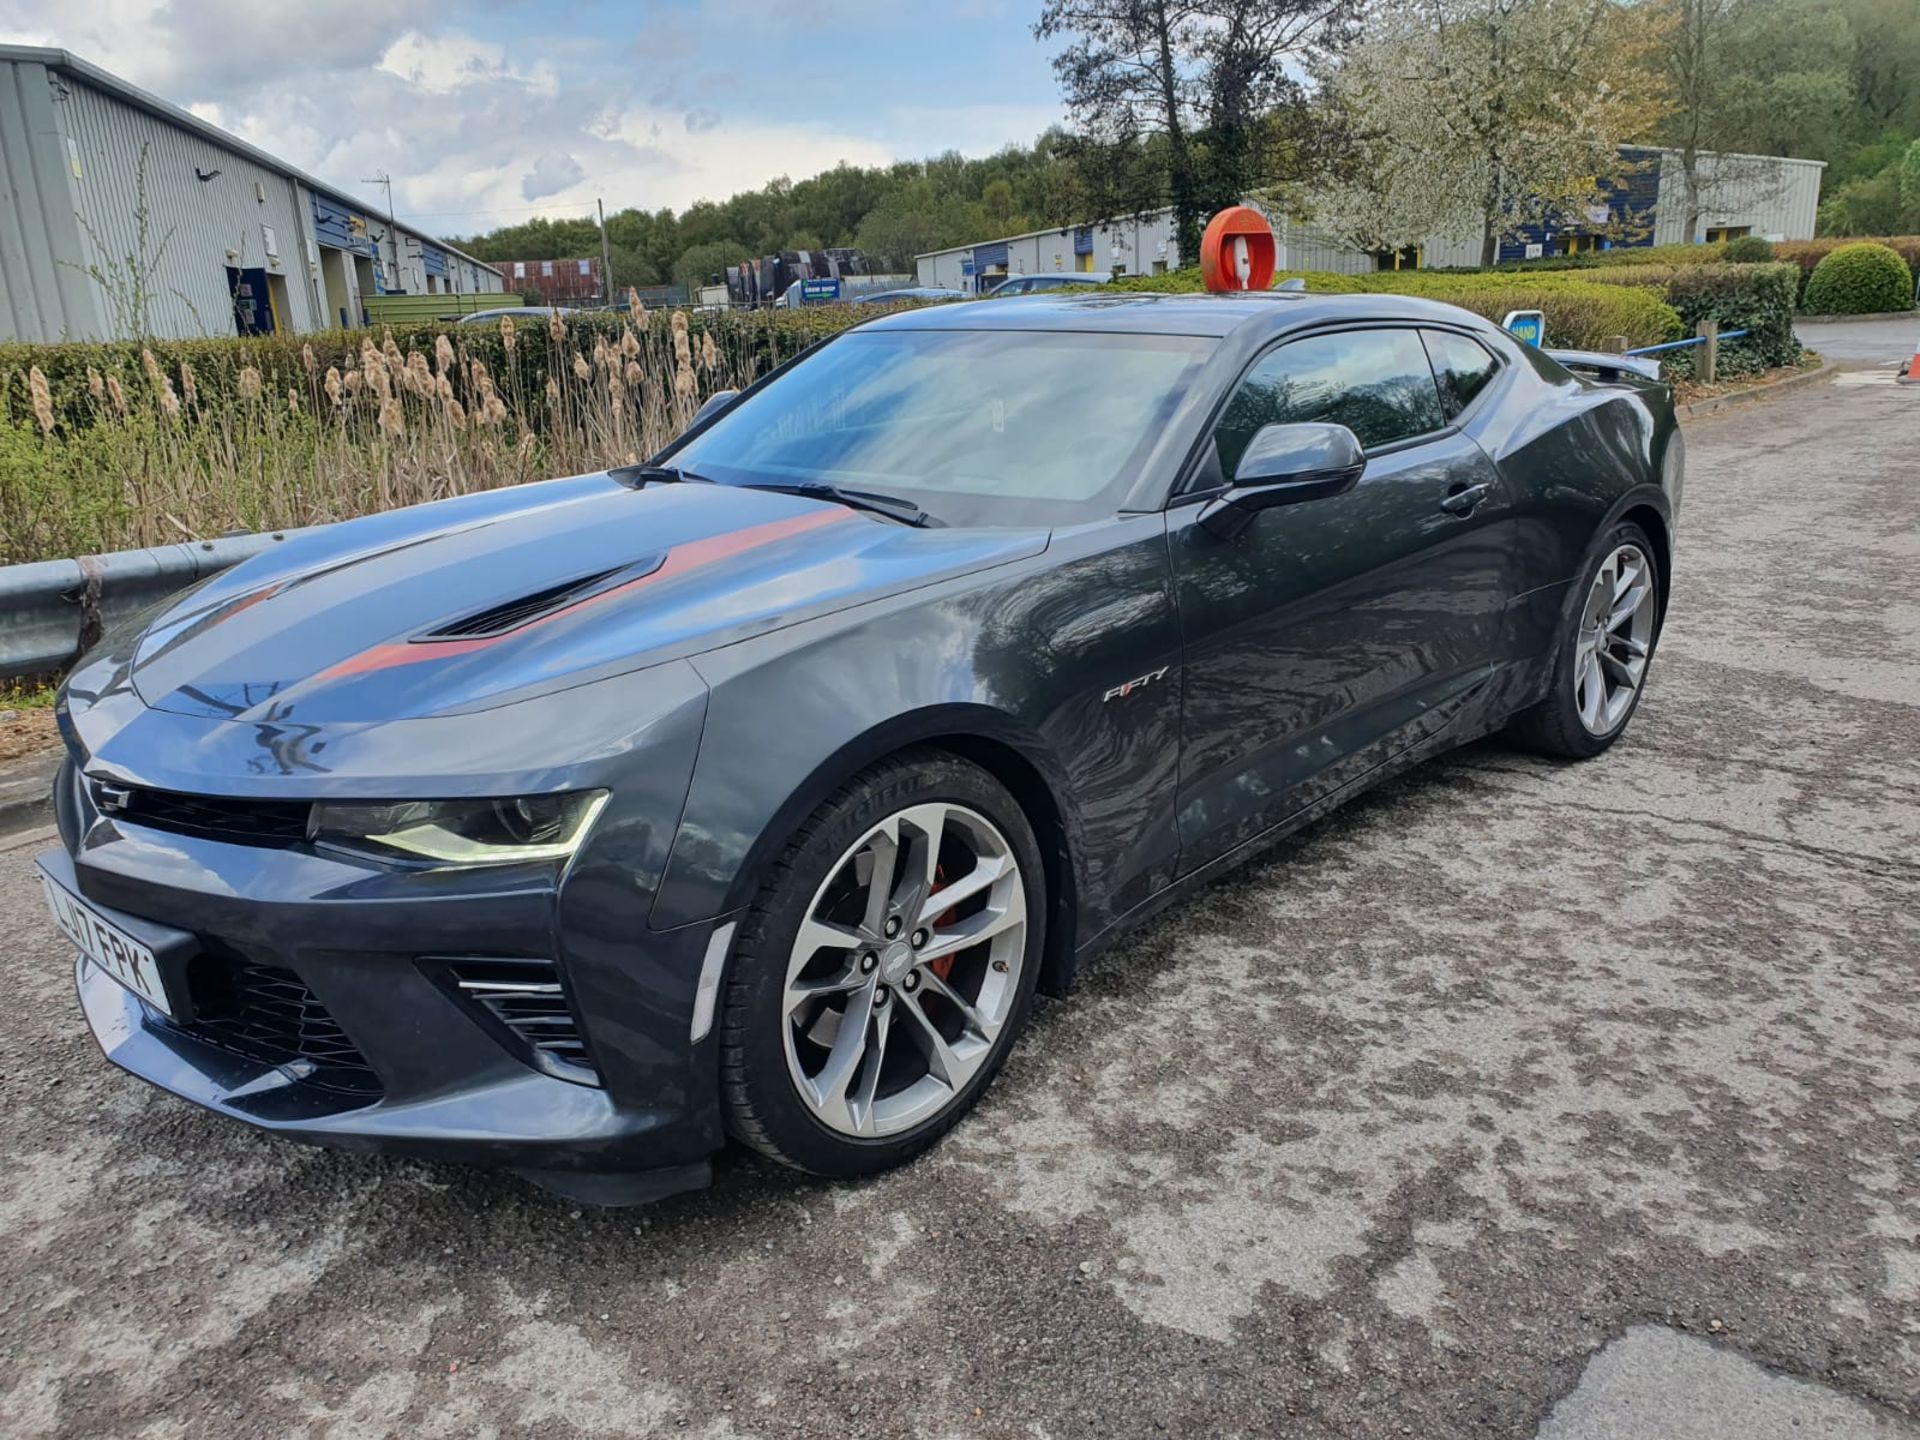 2017/17 REG CHEVROLET CAMARO V8 AUTOMATIC GREY COUPE 50th ANNIVERSARY EDITION, LHD, LOW MILEAGE - Image 6 of 43